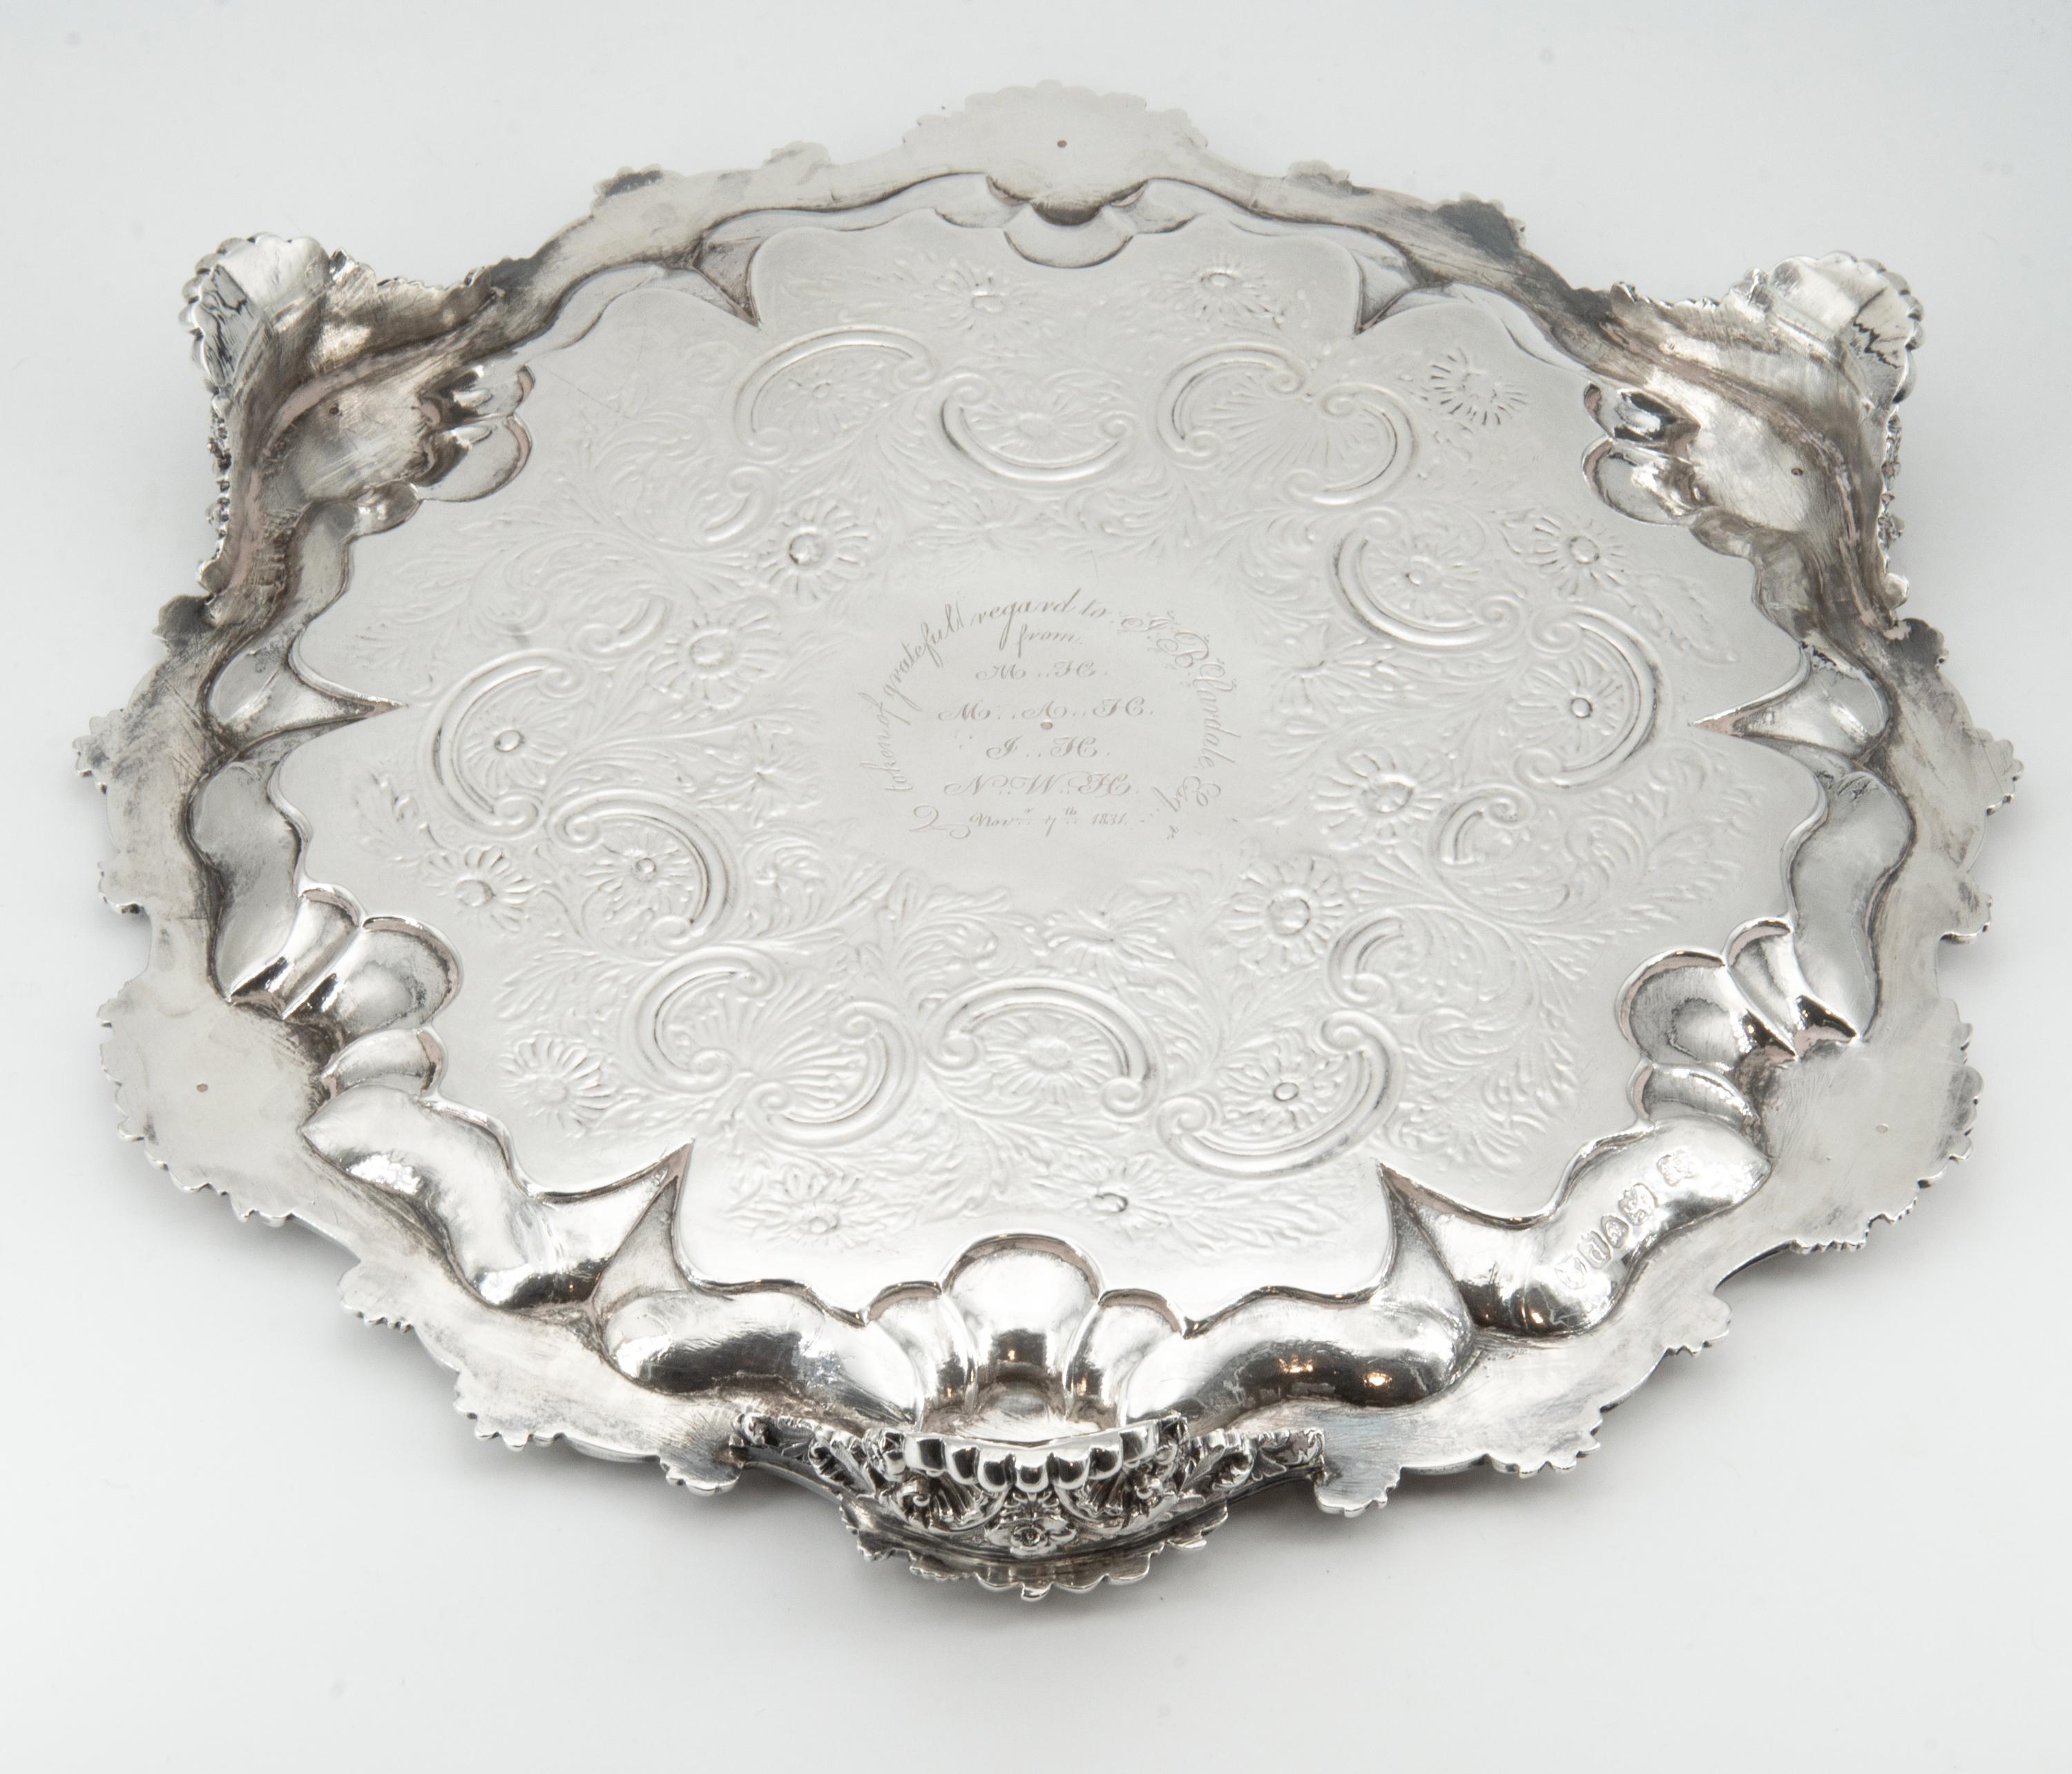 Antique William IV Sterling Silver Flat-Chased Waiter Tray London 1831 For Sale 1